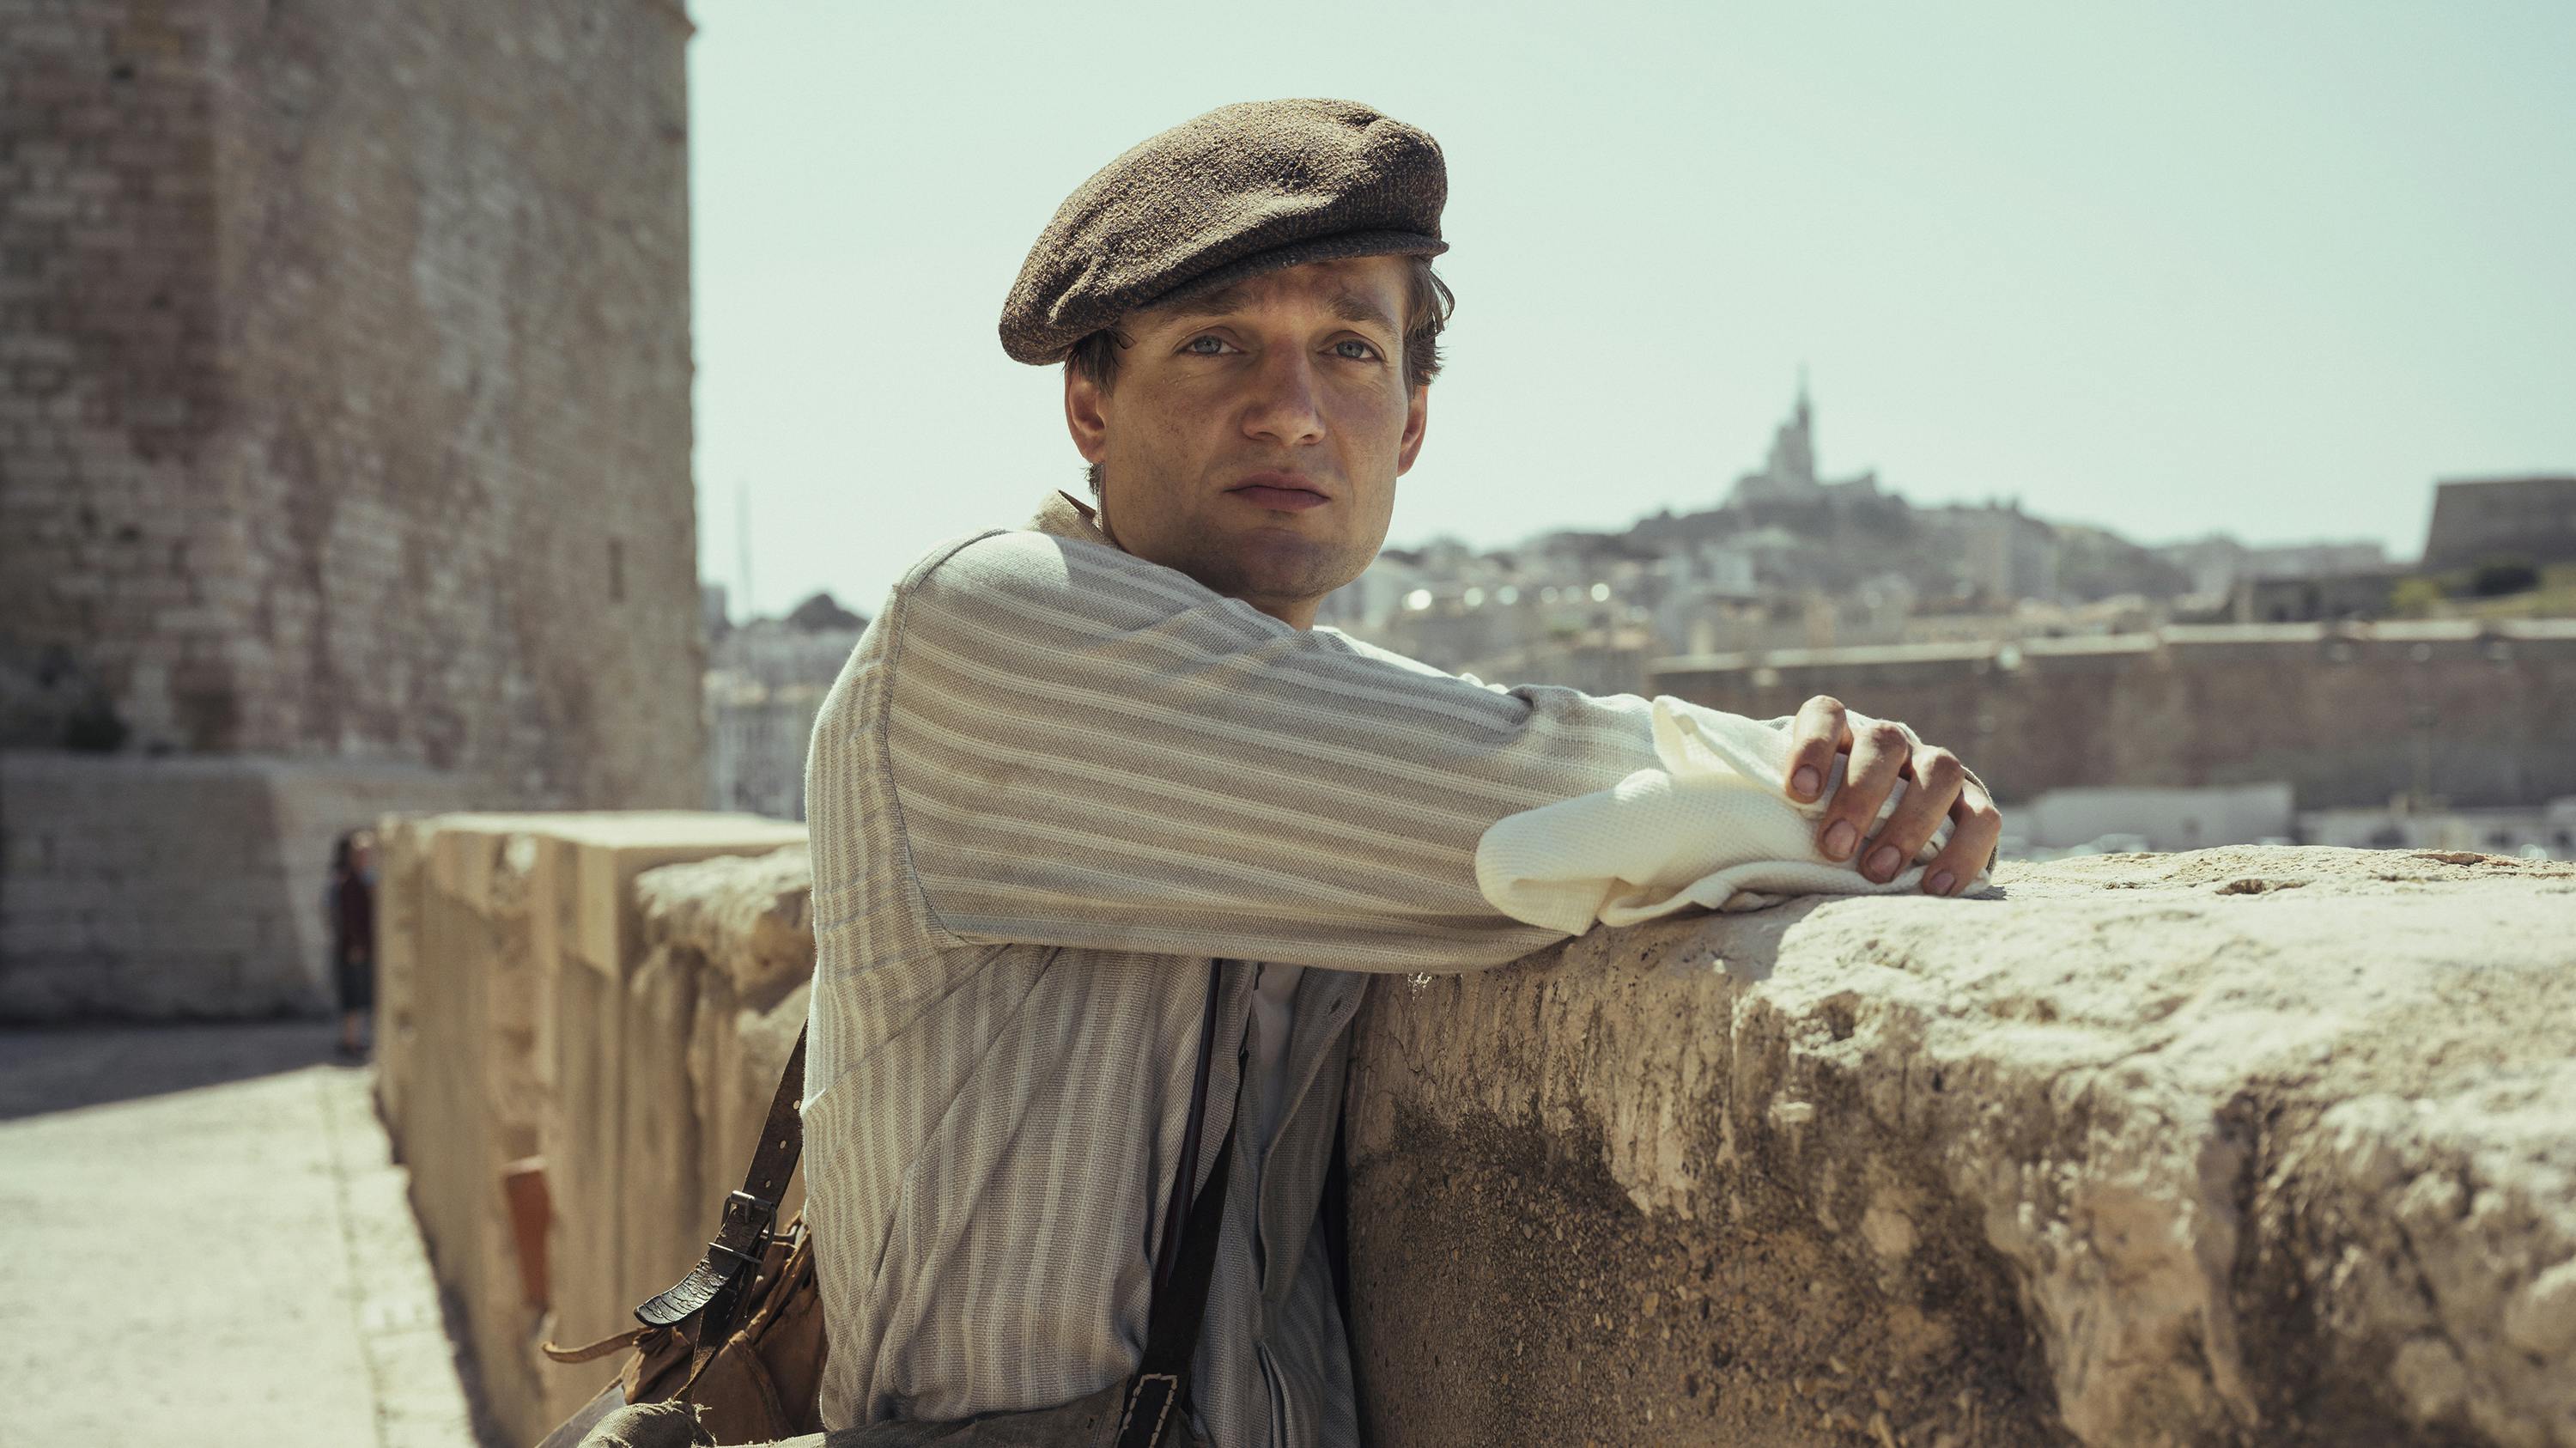 Albert Hirschman (Lucas Englander) wears a striped shirt and messenger boy hat and leans against a crumbly ledge.